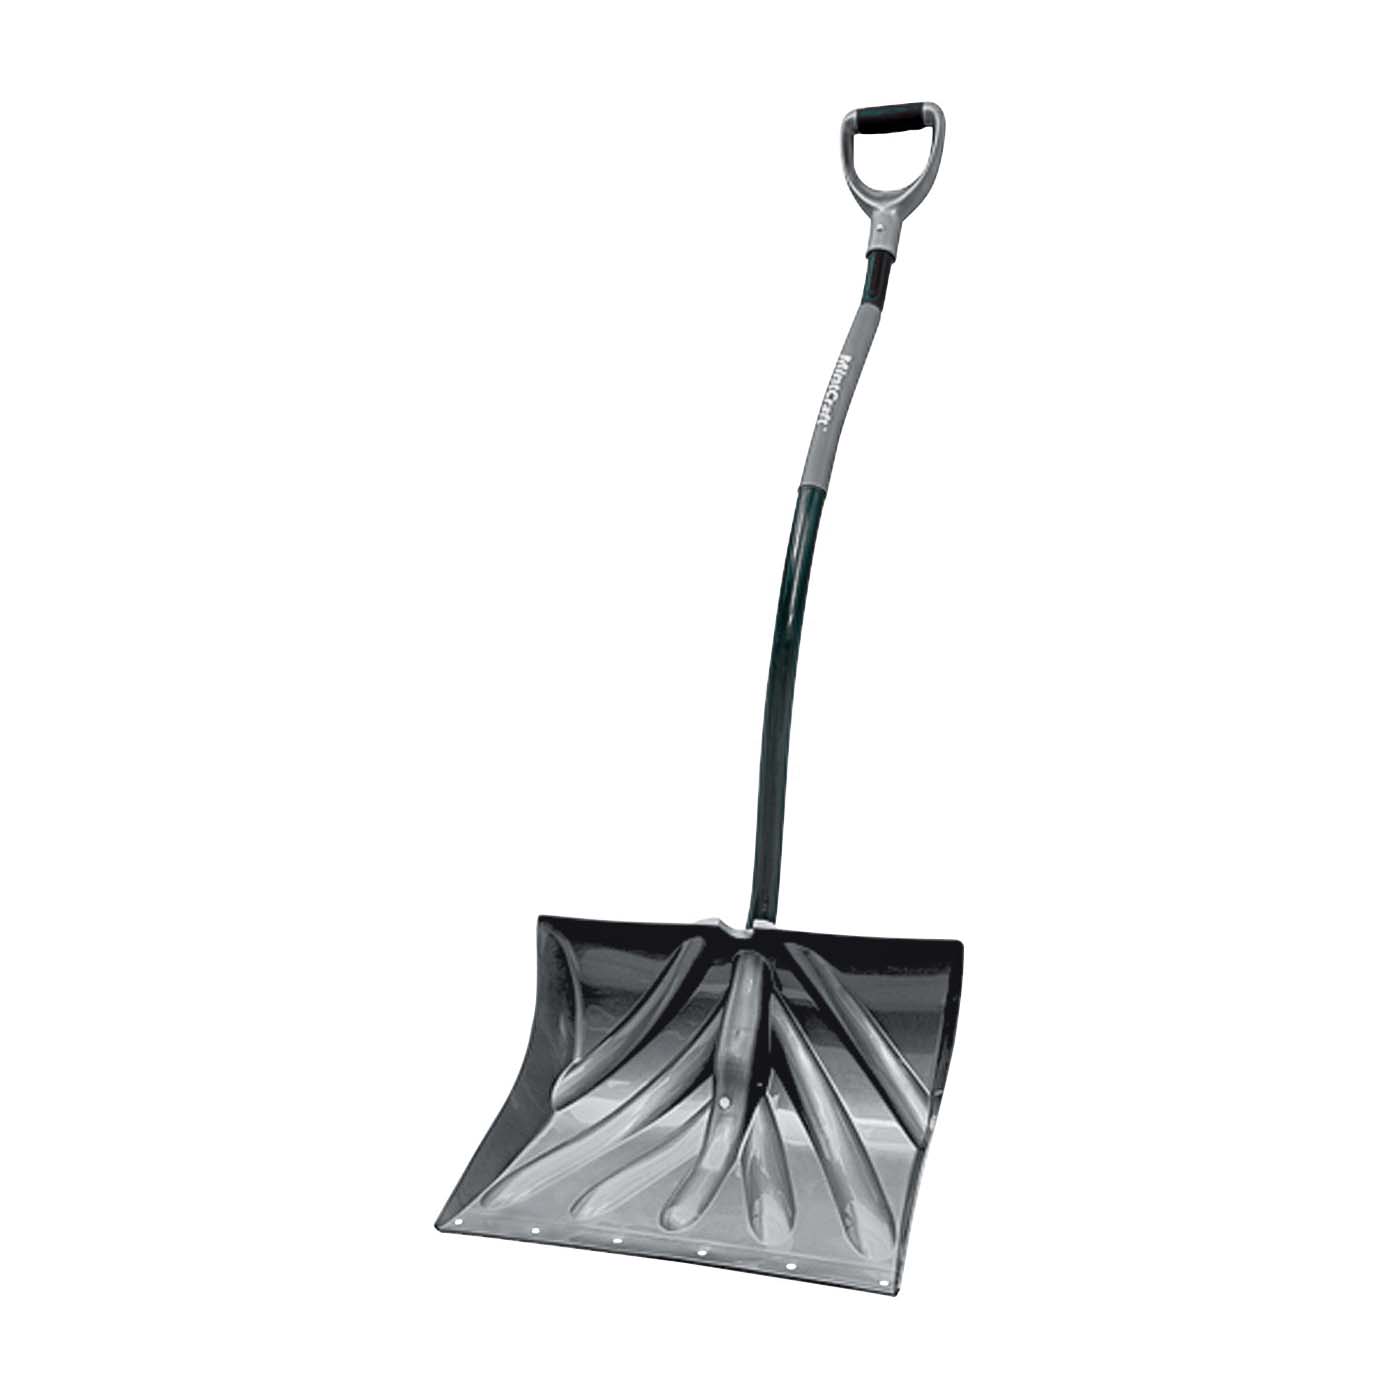 Vulcan 34630 Snow Shovel with Sleeve, Poly Blade, Steel Handle - 1